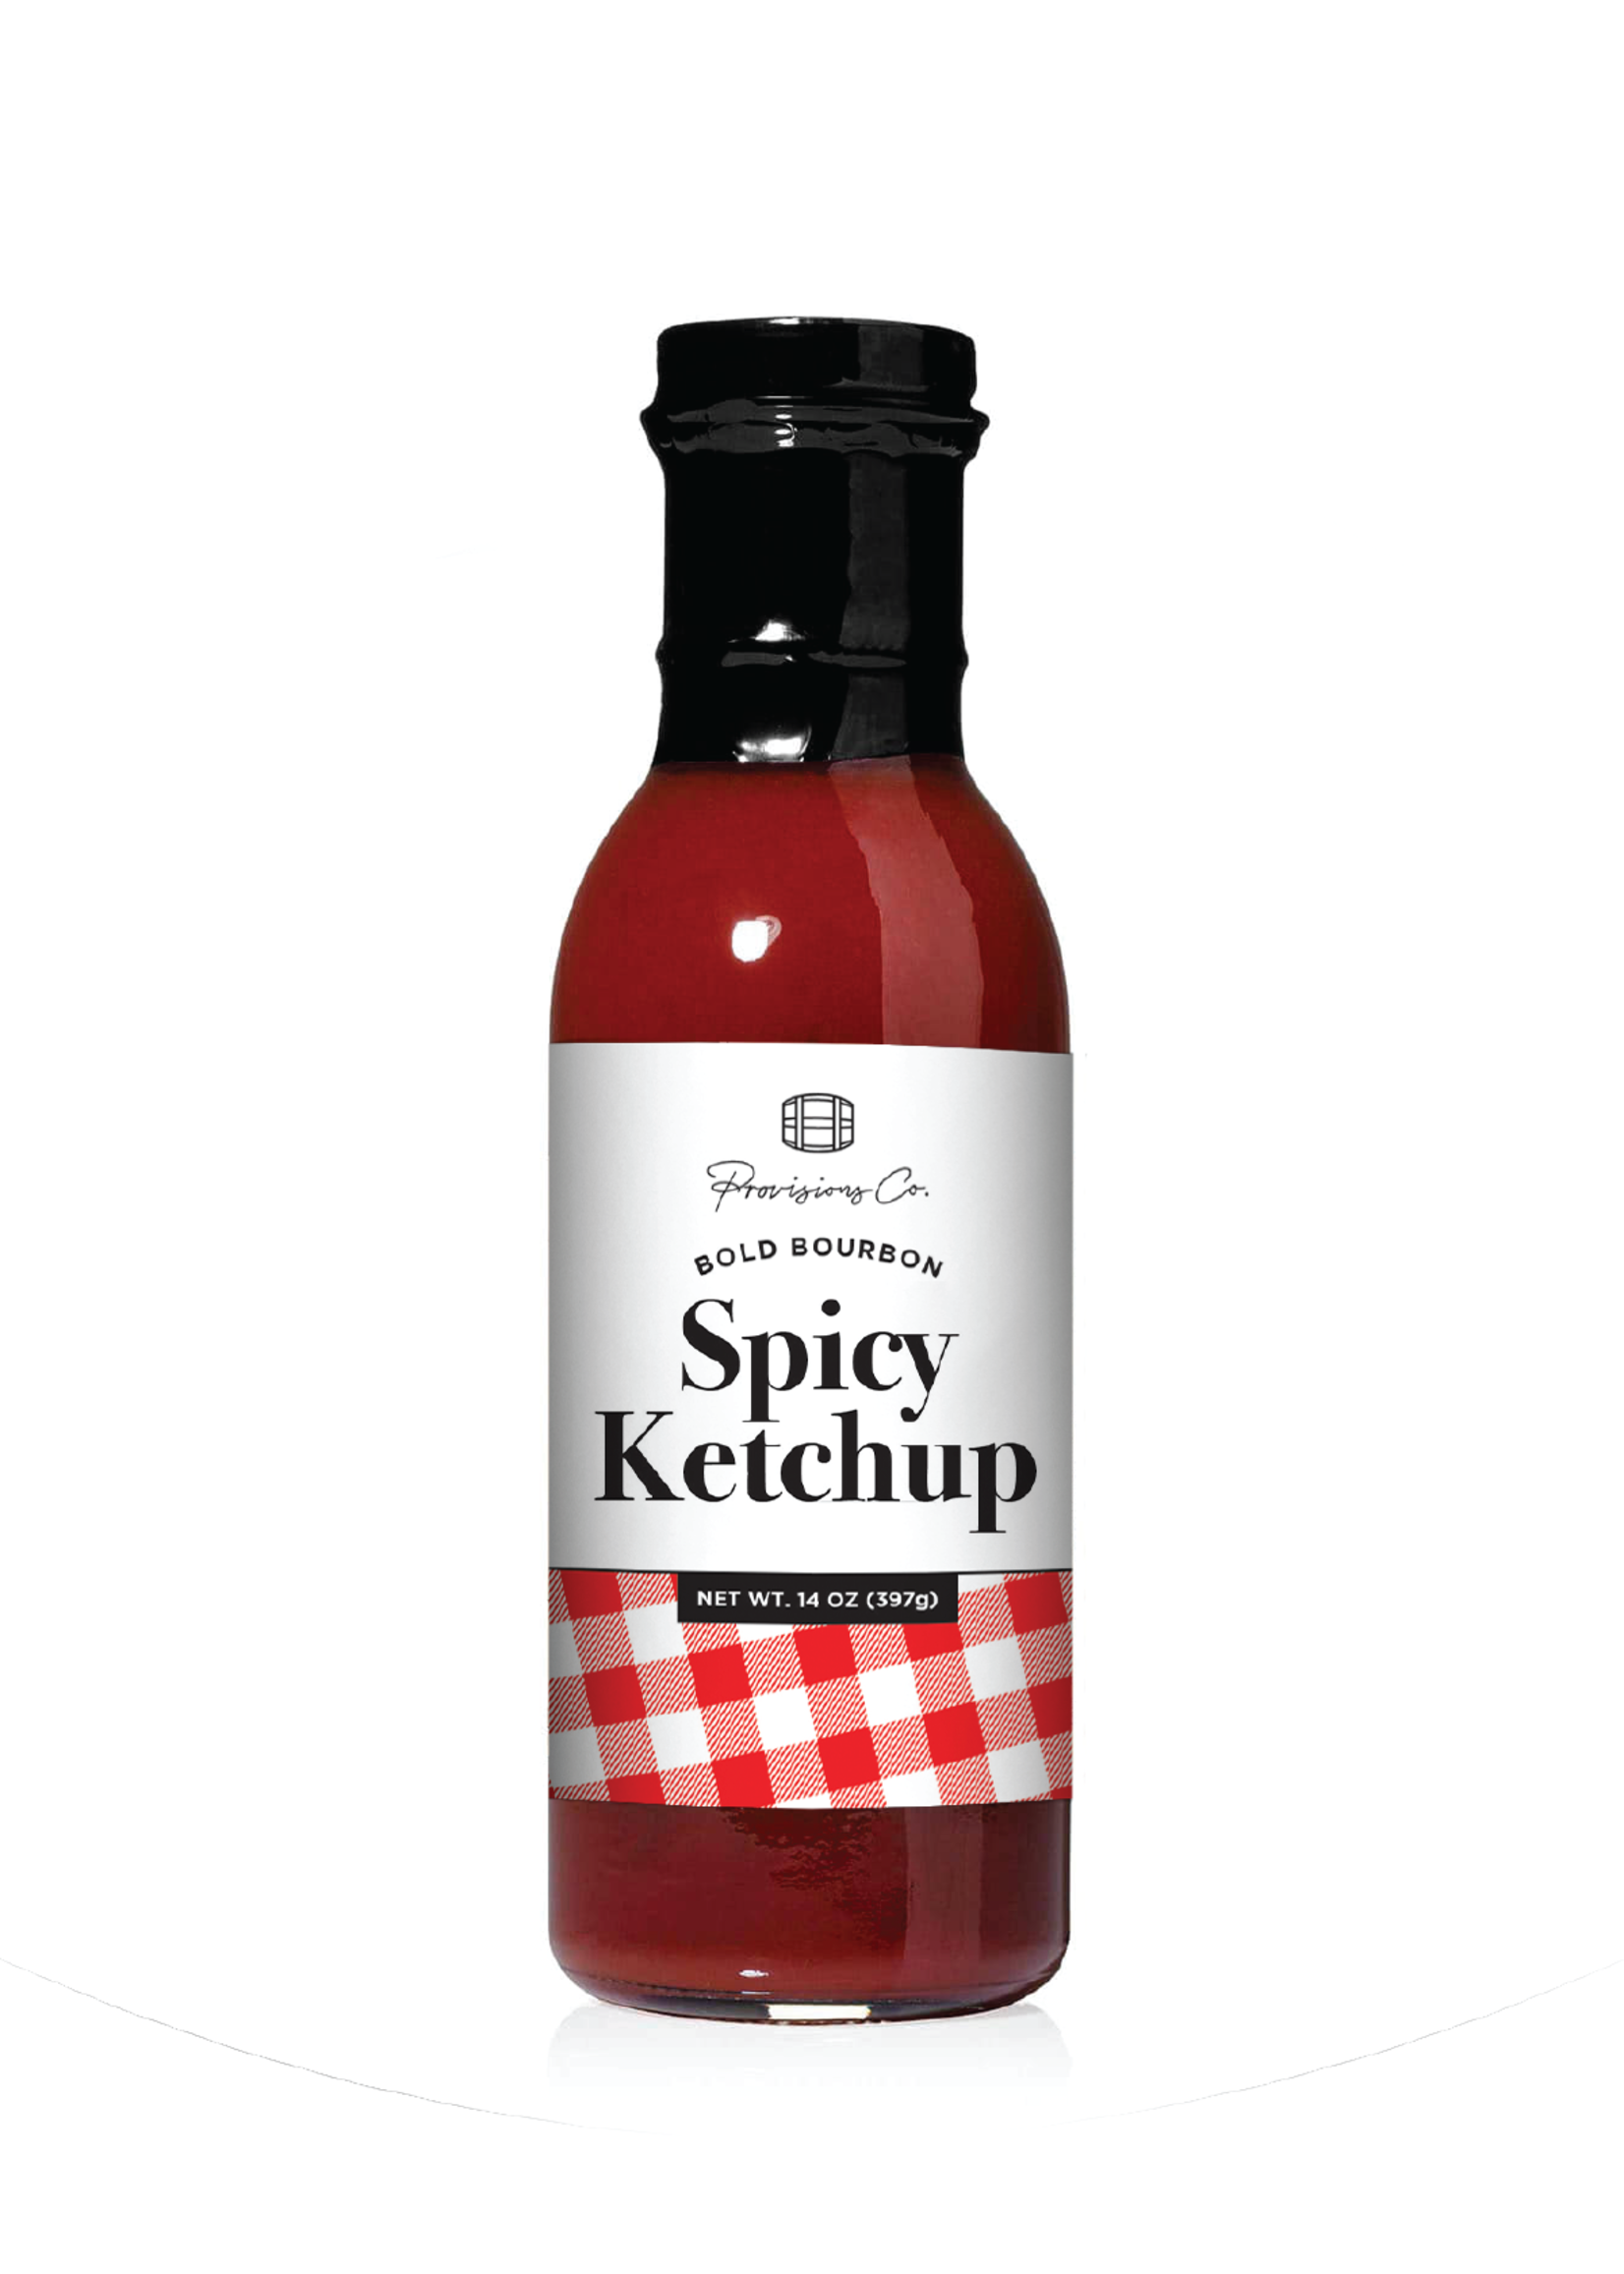 Provisions Co. Spicy Ketchup